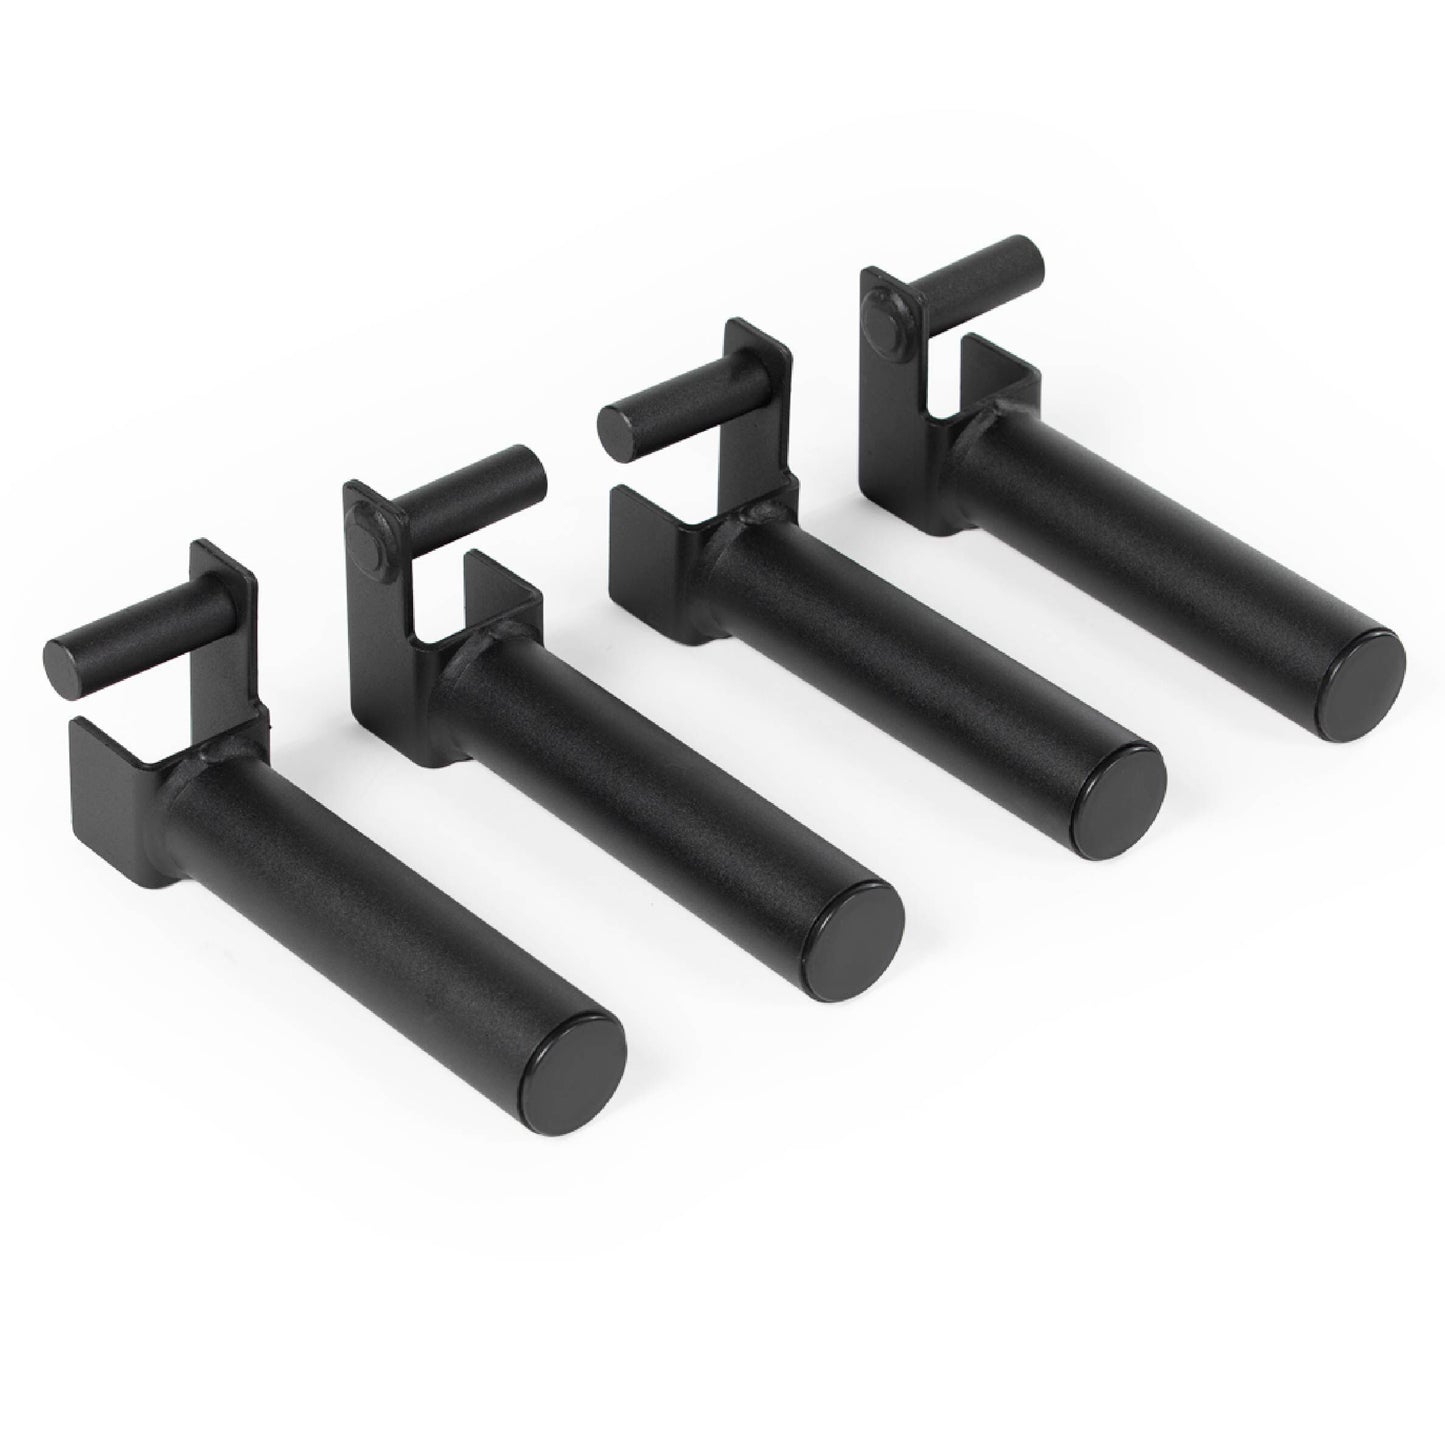 T-2 Series Weight Plate Holders - view 1